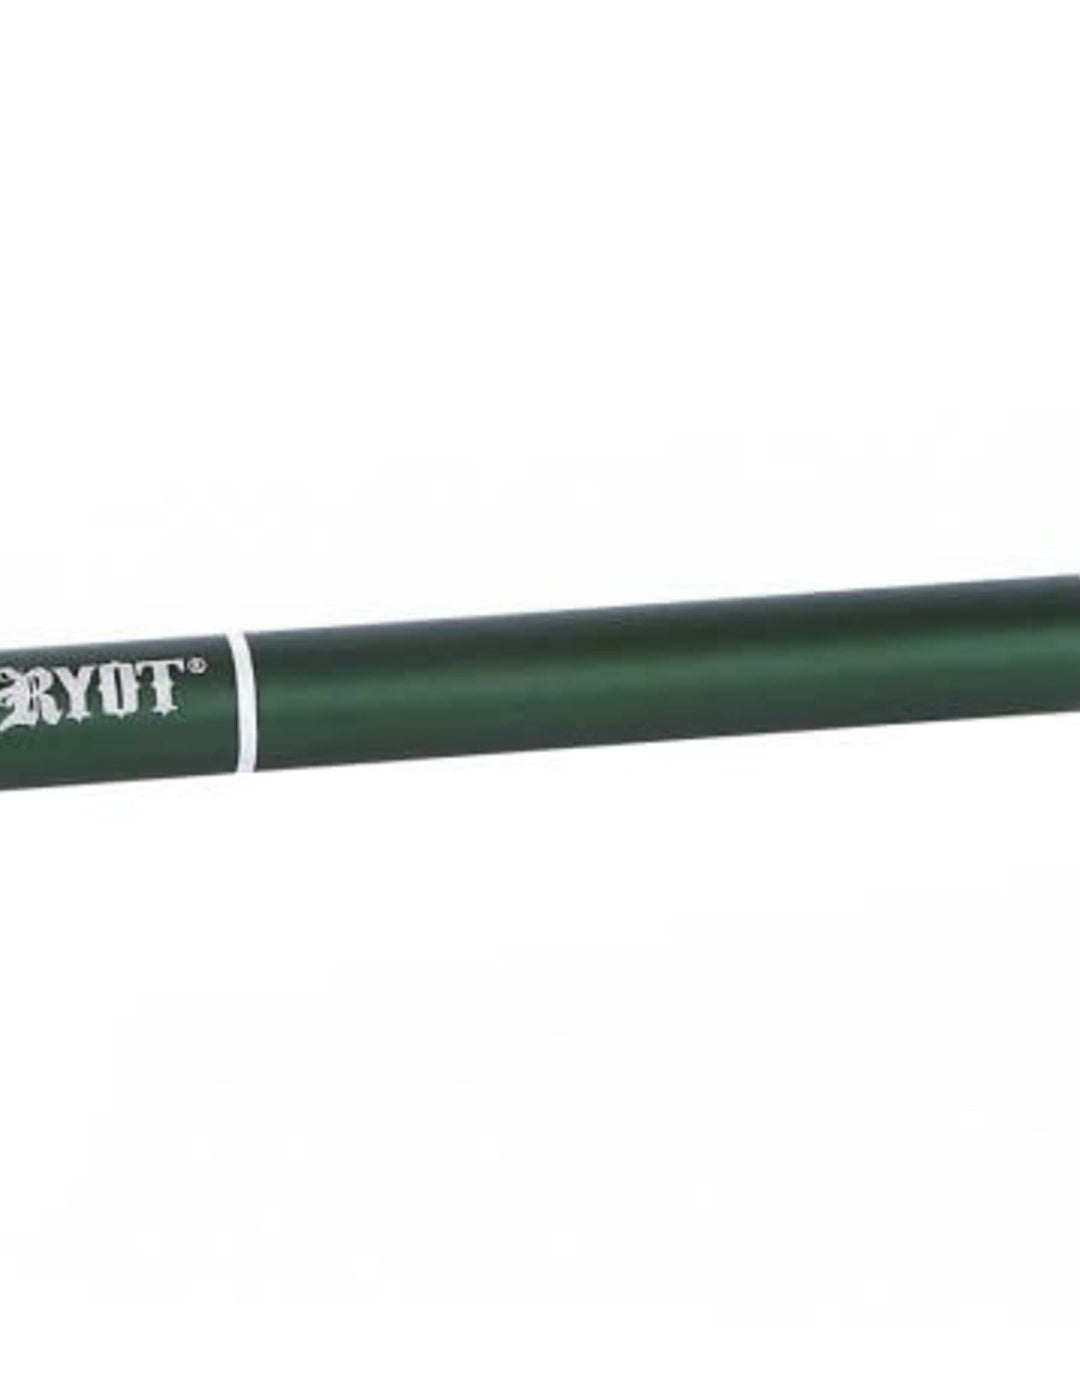 RYOT 420 Accessories Green RYOT 9mm Slim Anodized Aluminum Taster Bat RYOT 9mm Slim Anodized Aluminum Taster - Morden Vape & 420 SuperStore, Manitoba, Canada